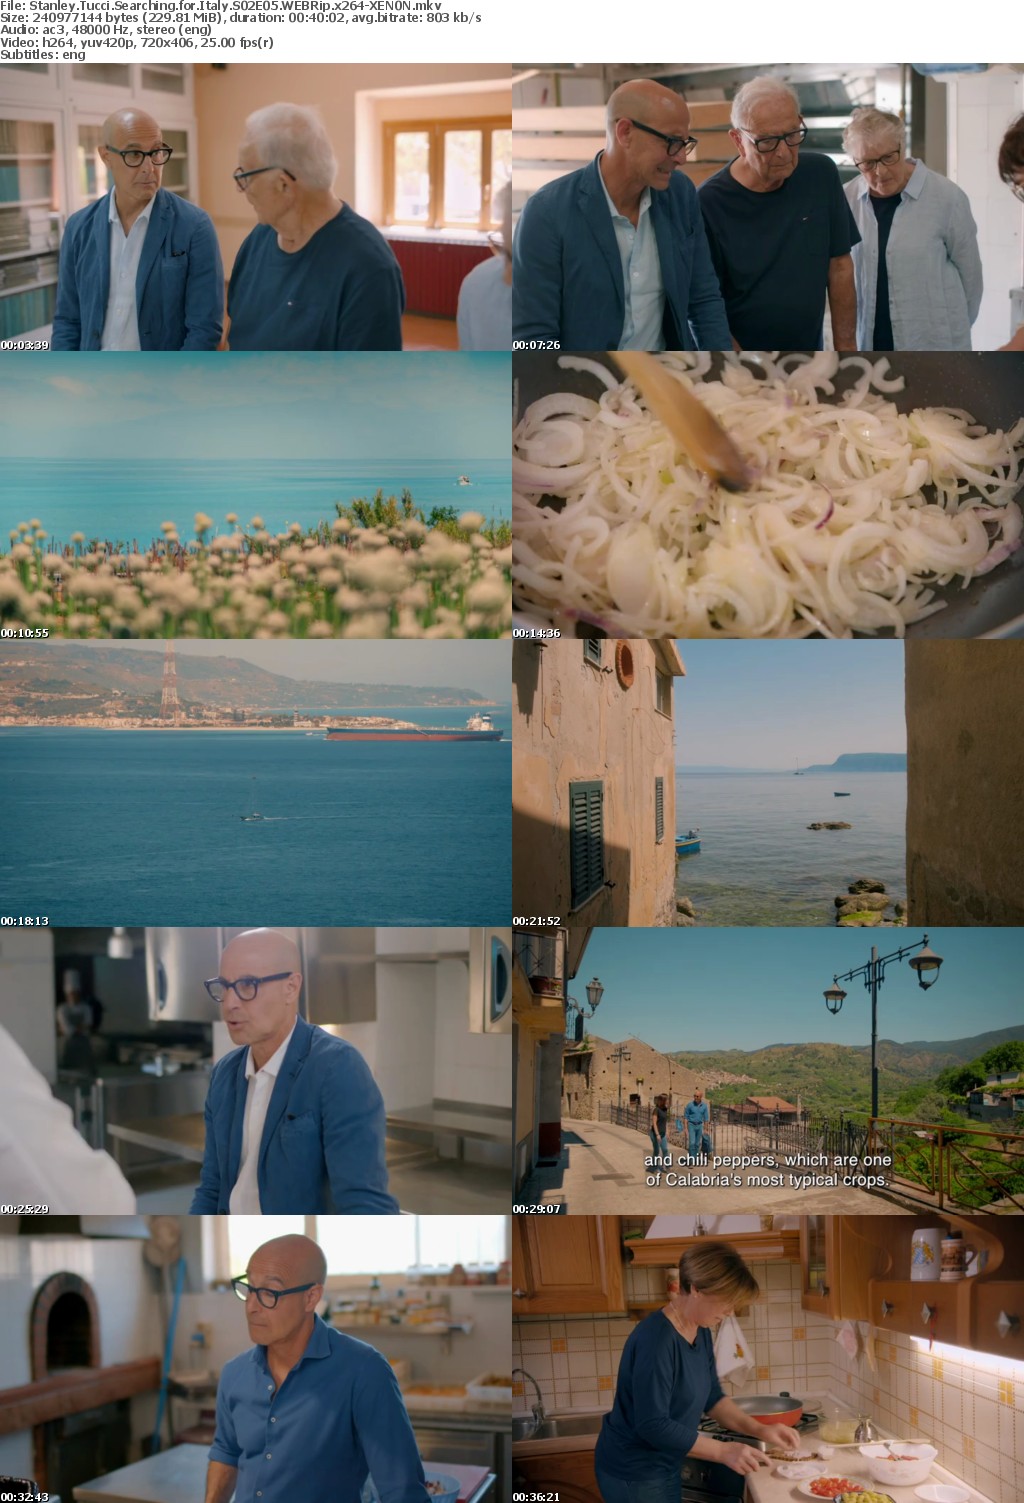 Stanley Tucci Searching for Italy S02E05 WEBRip x264-XEN0N